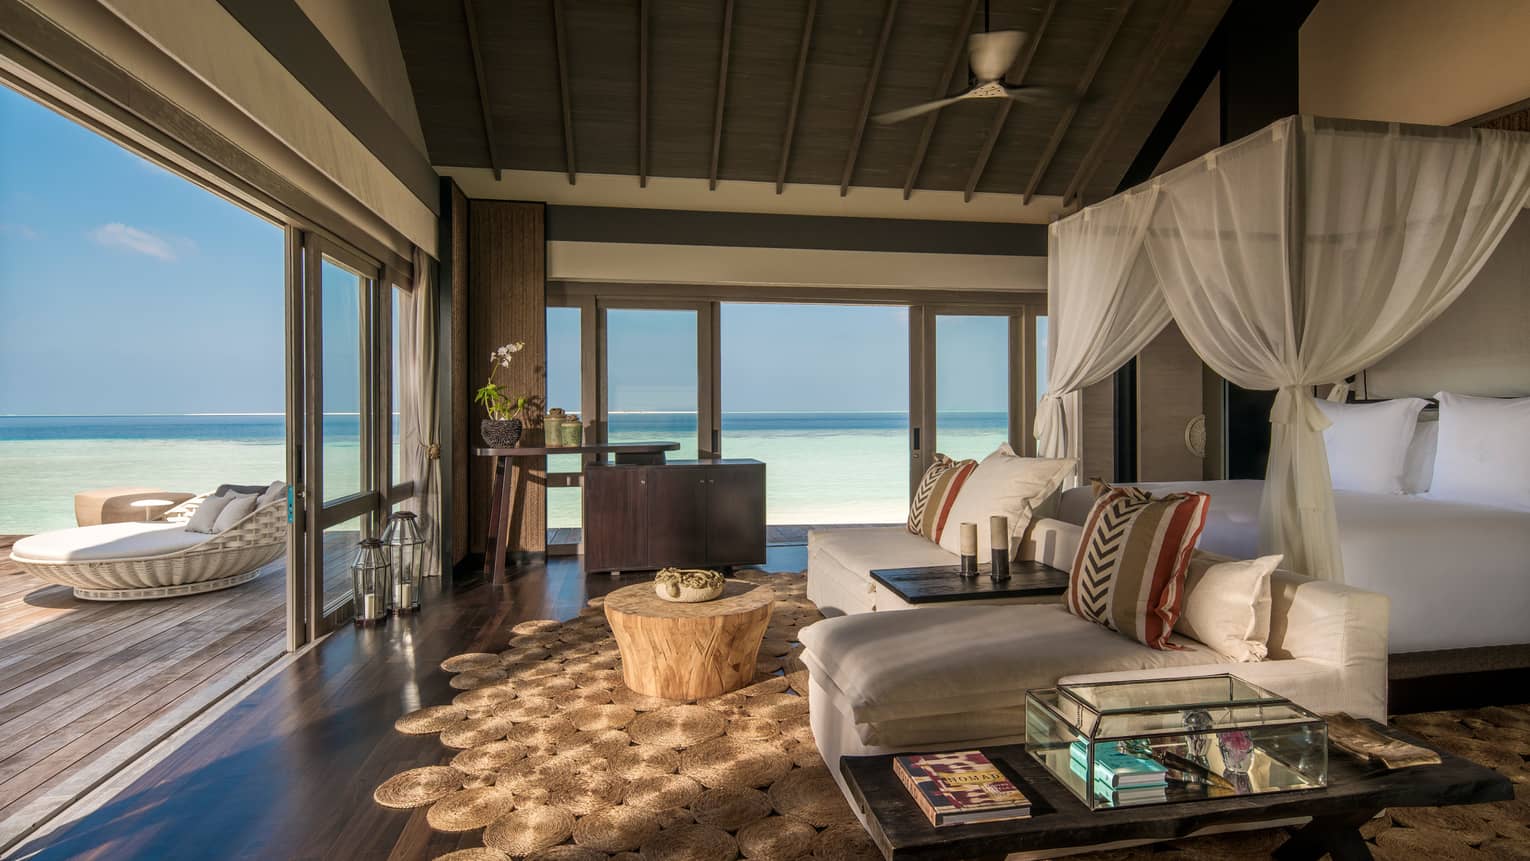 Three-Bedroom Beach Villa canopy bed. chaise lounge chairs across from open sliding doors to patio